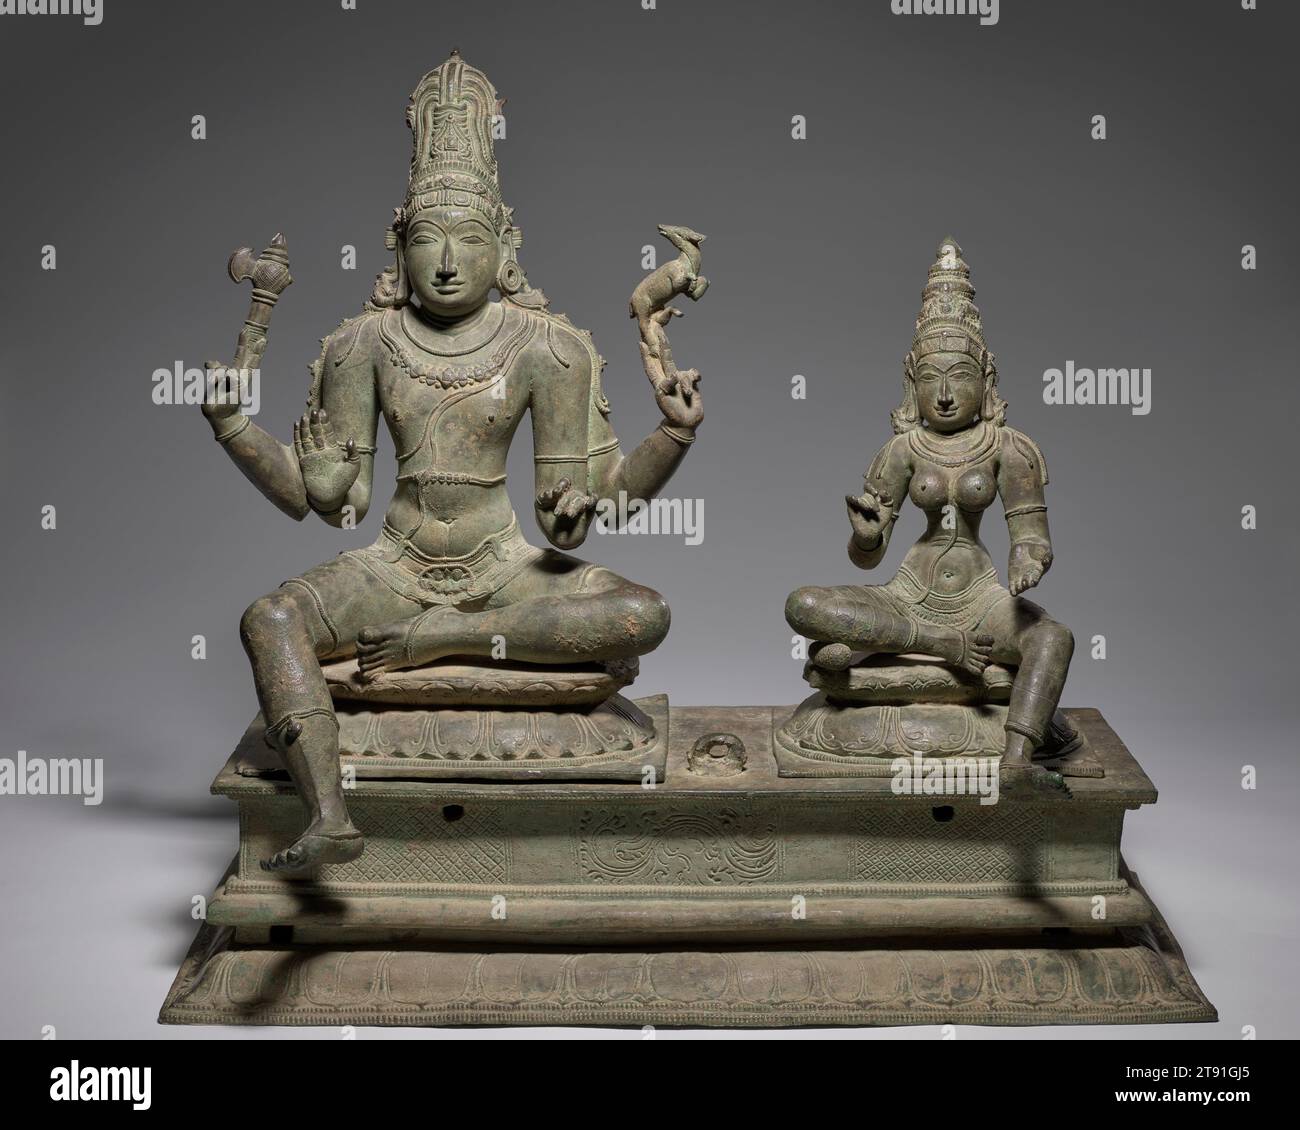 Somaskanda (Holy Family), 13th-14th century, 23 1/4 x 26 1/4 x 13 in. (59.06 x 66.68 x 33.02 cm), Bronze, India, 13th-14th century, Shiva and his wife Uma sit next to each other on double lotus pedestals, between them a residual remnant of their small child, Skanda, now missing from the magnificent bronze. The standard format—known as Somaskanda—arose as early as the 6th century in temples from Tamil Nadu, and remains Shiva’s main manifest form today. In south Indian temples, bronze images play a huge role in devotional practice, where they are treated as living embodiments of the gods. Stock Photo